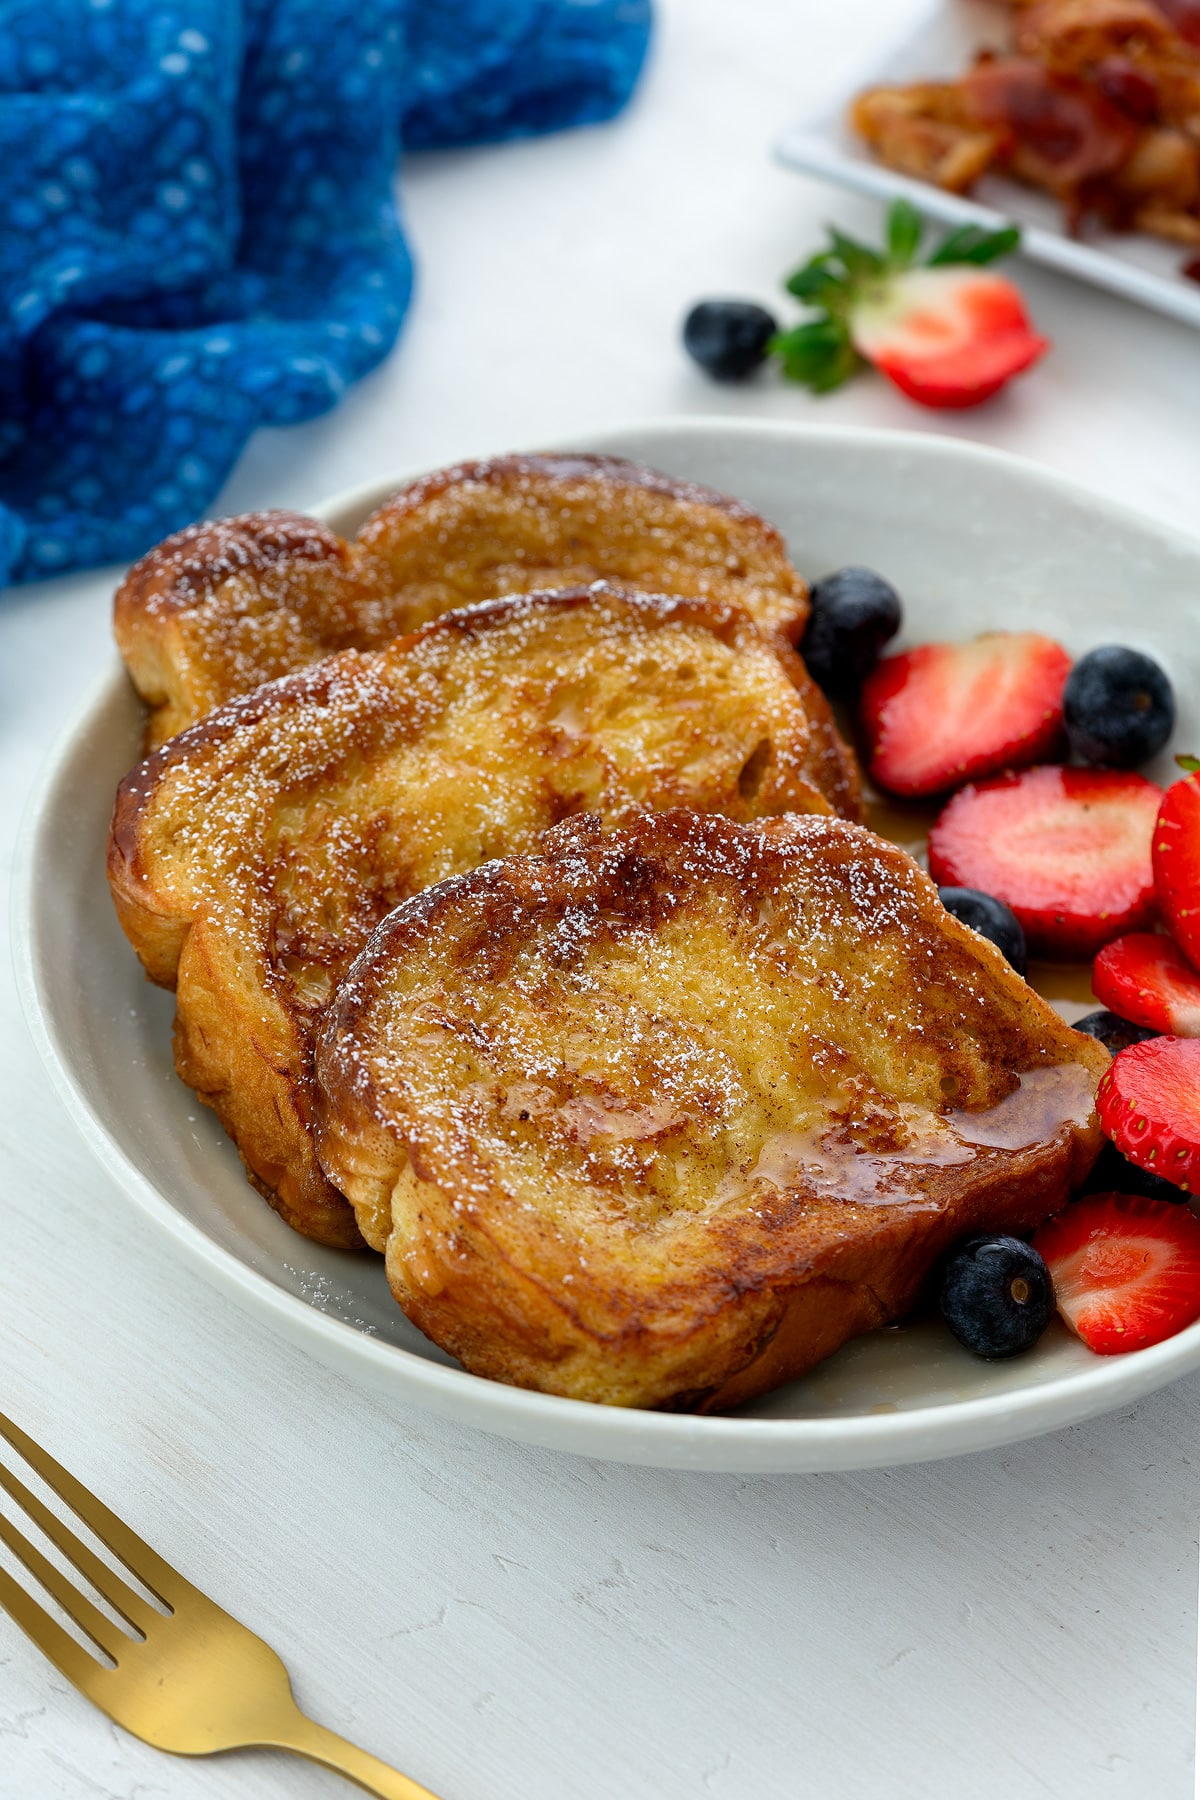 Homemade French toast slices drizzled with syrup and dusted with sugar, served in a white bowl alongside blueberries and strawberries. A blue towel, golden fork, and bacon on a plate are arranged around the bowl.